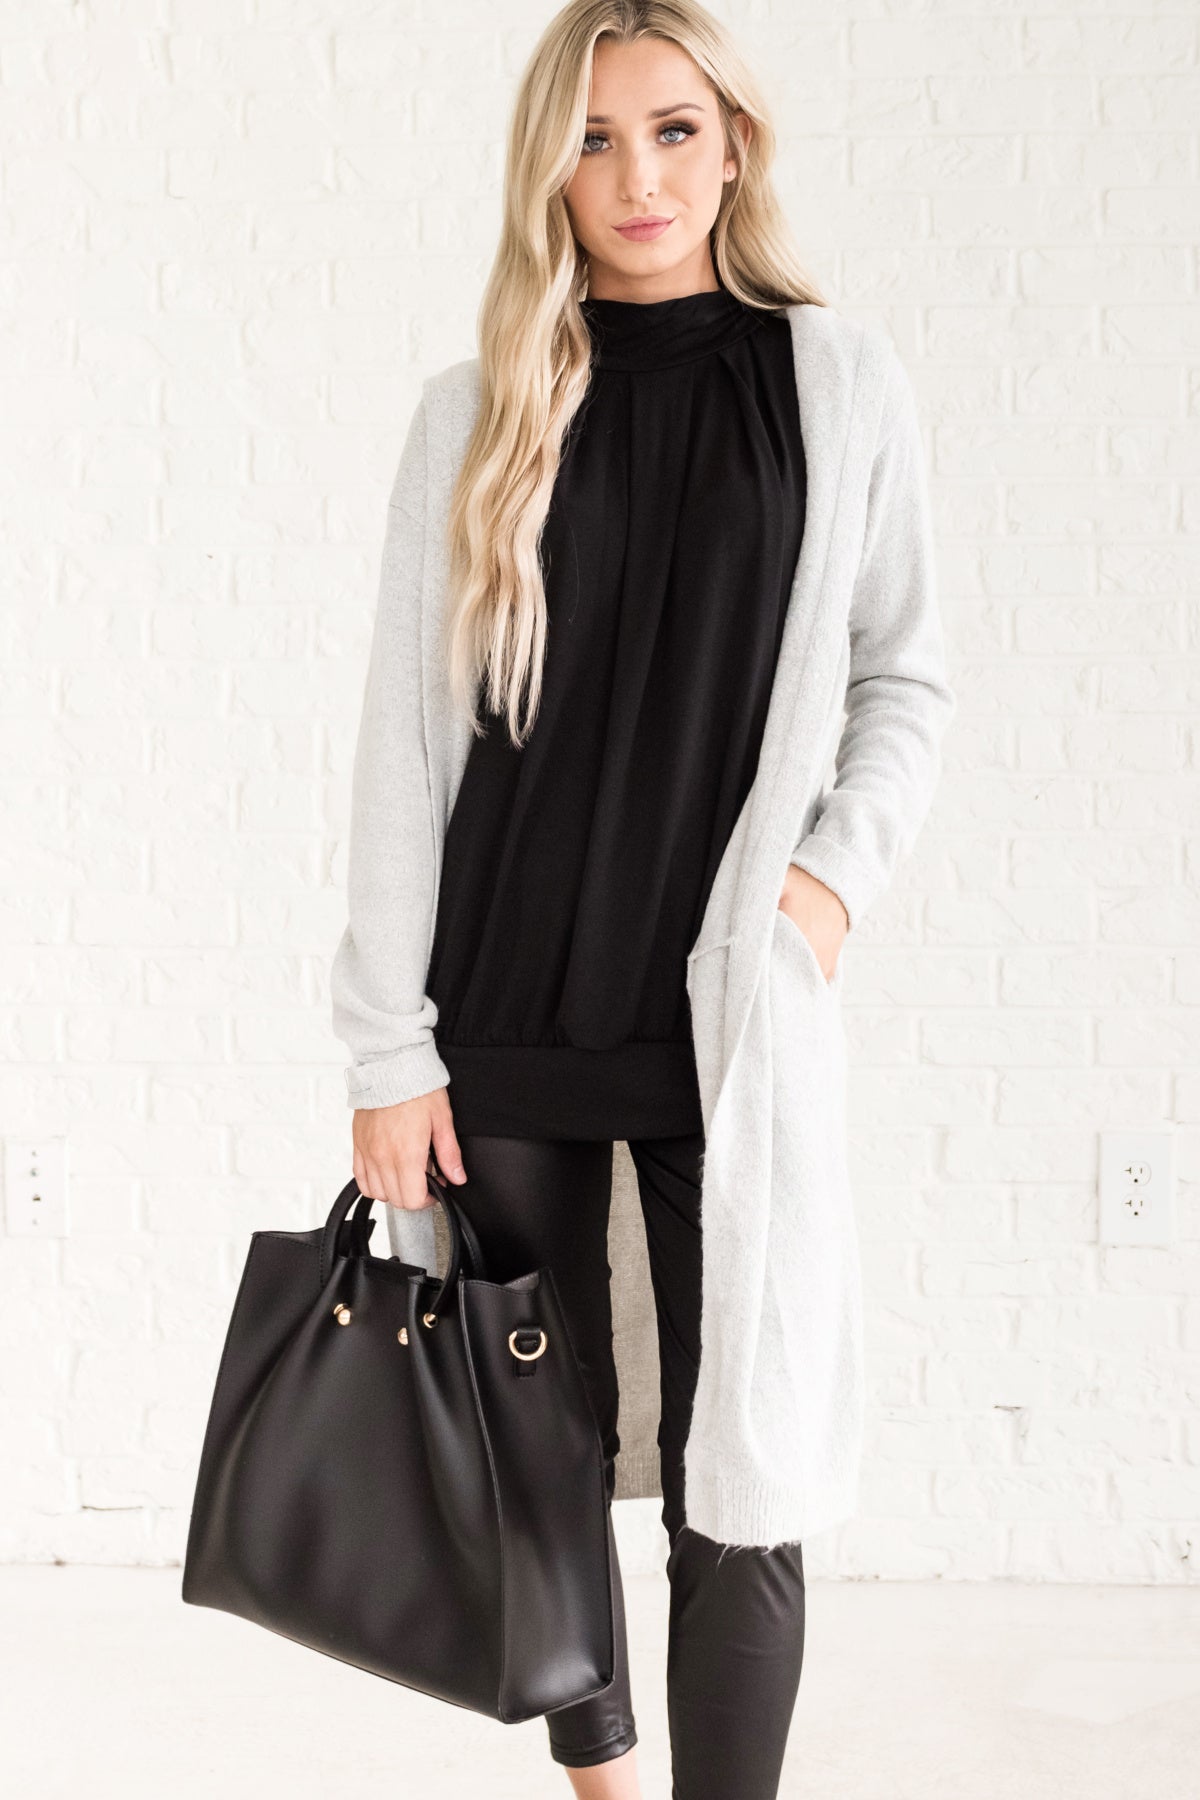 long gray cardigan outfit